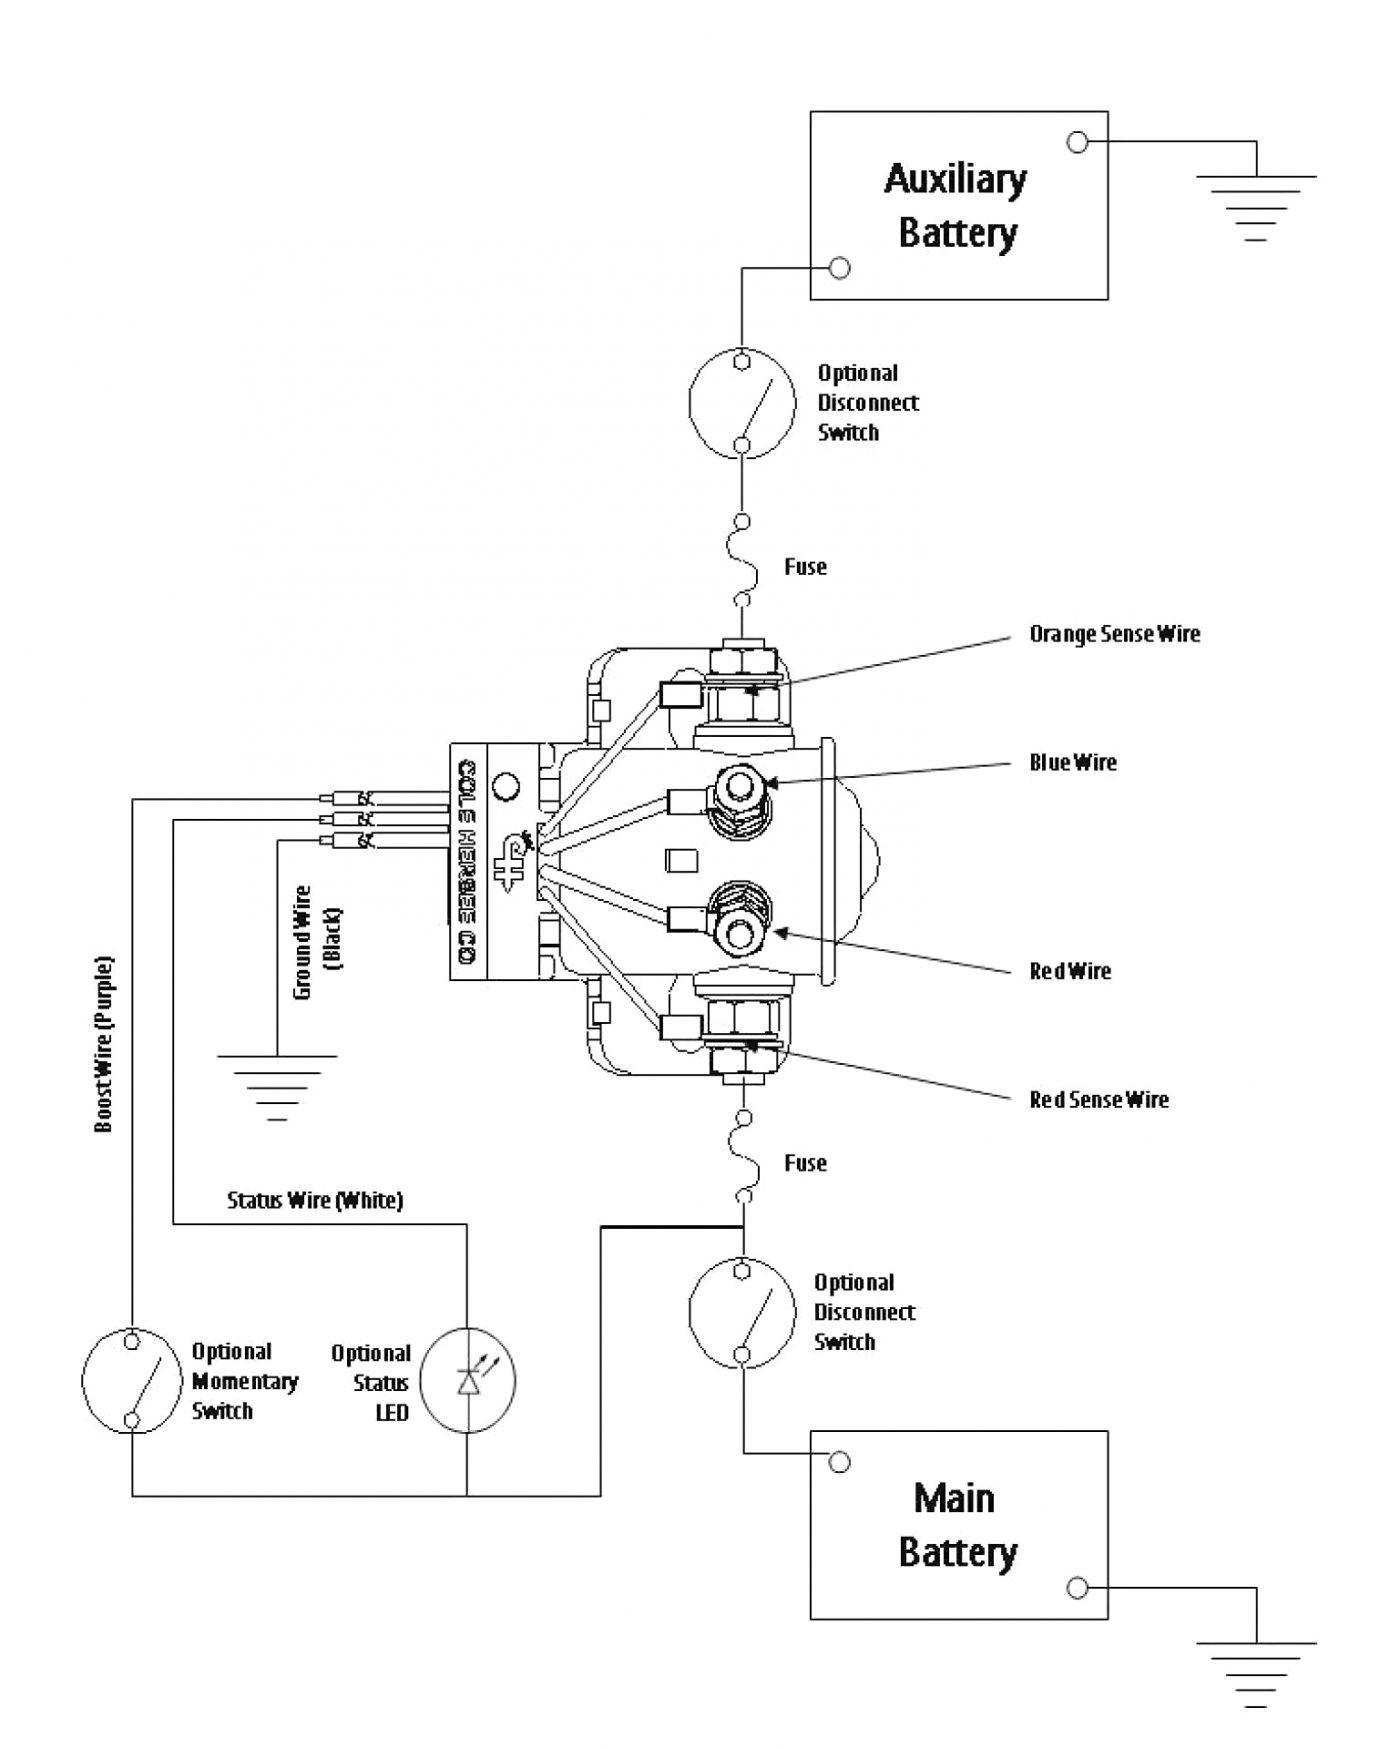 Wiring Diagram Alternator to Battery New Wiring Diagram for isolator Switch Save Rv Battery Disconnect